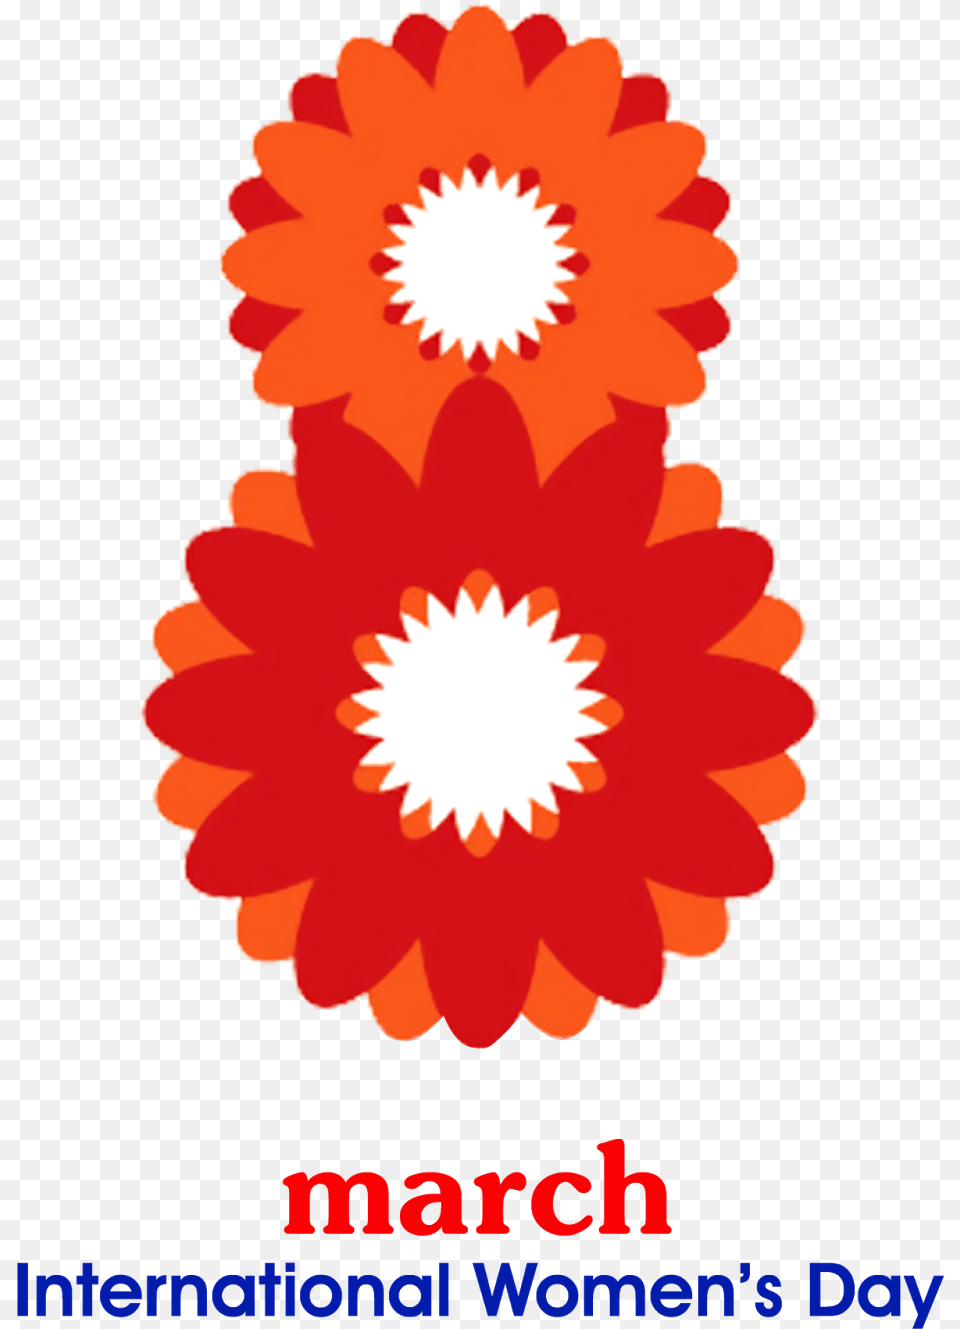 Happy Women S Day Images Backgound 8 March International Women39s Day 2018, Dahlia, Daisy, Flower, Petal Png Image